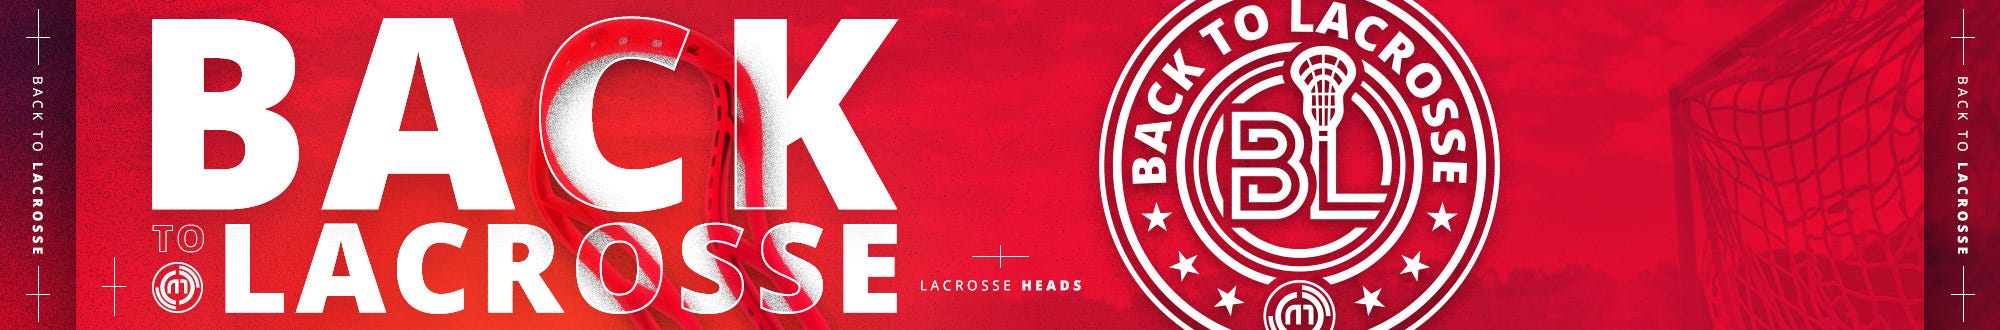 Back to Lacrosse: Heads